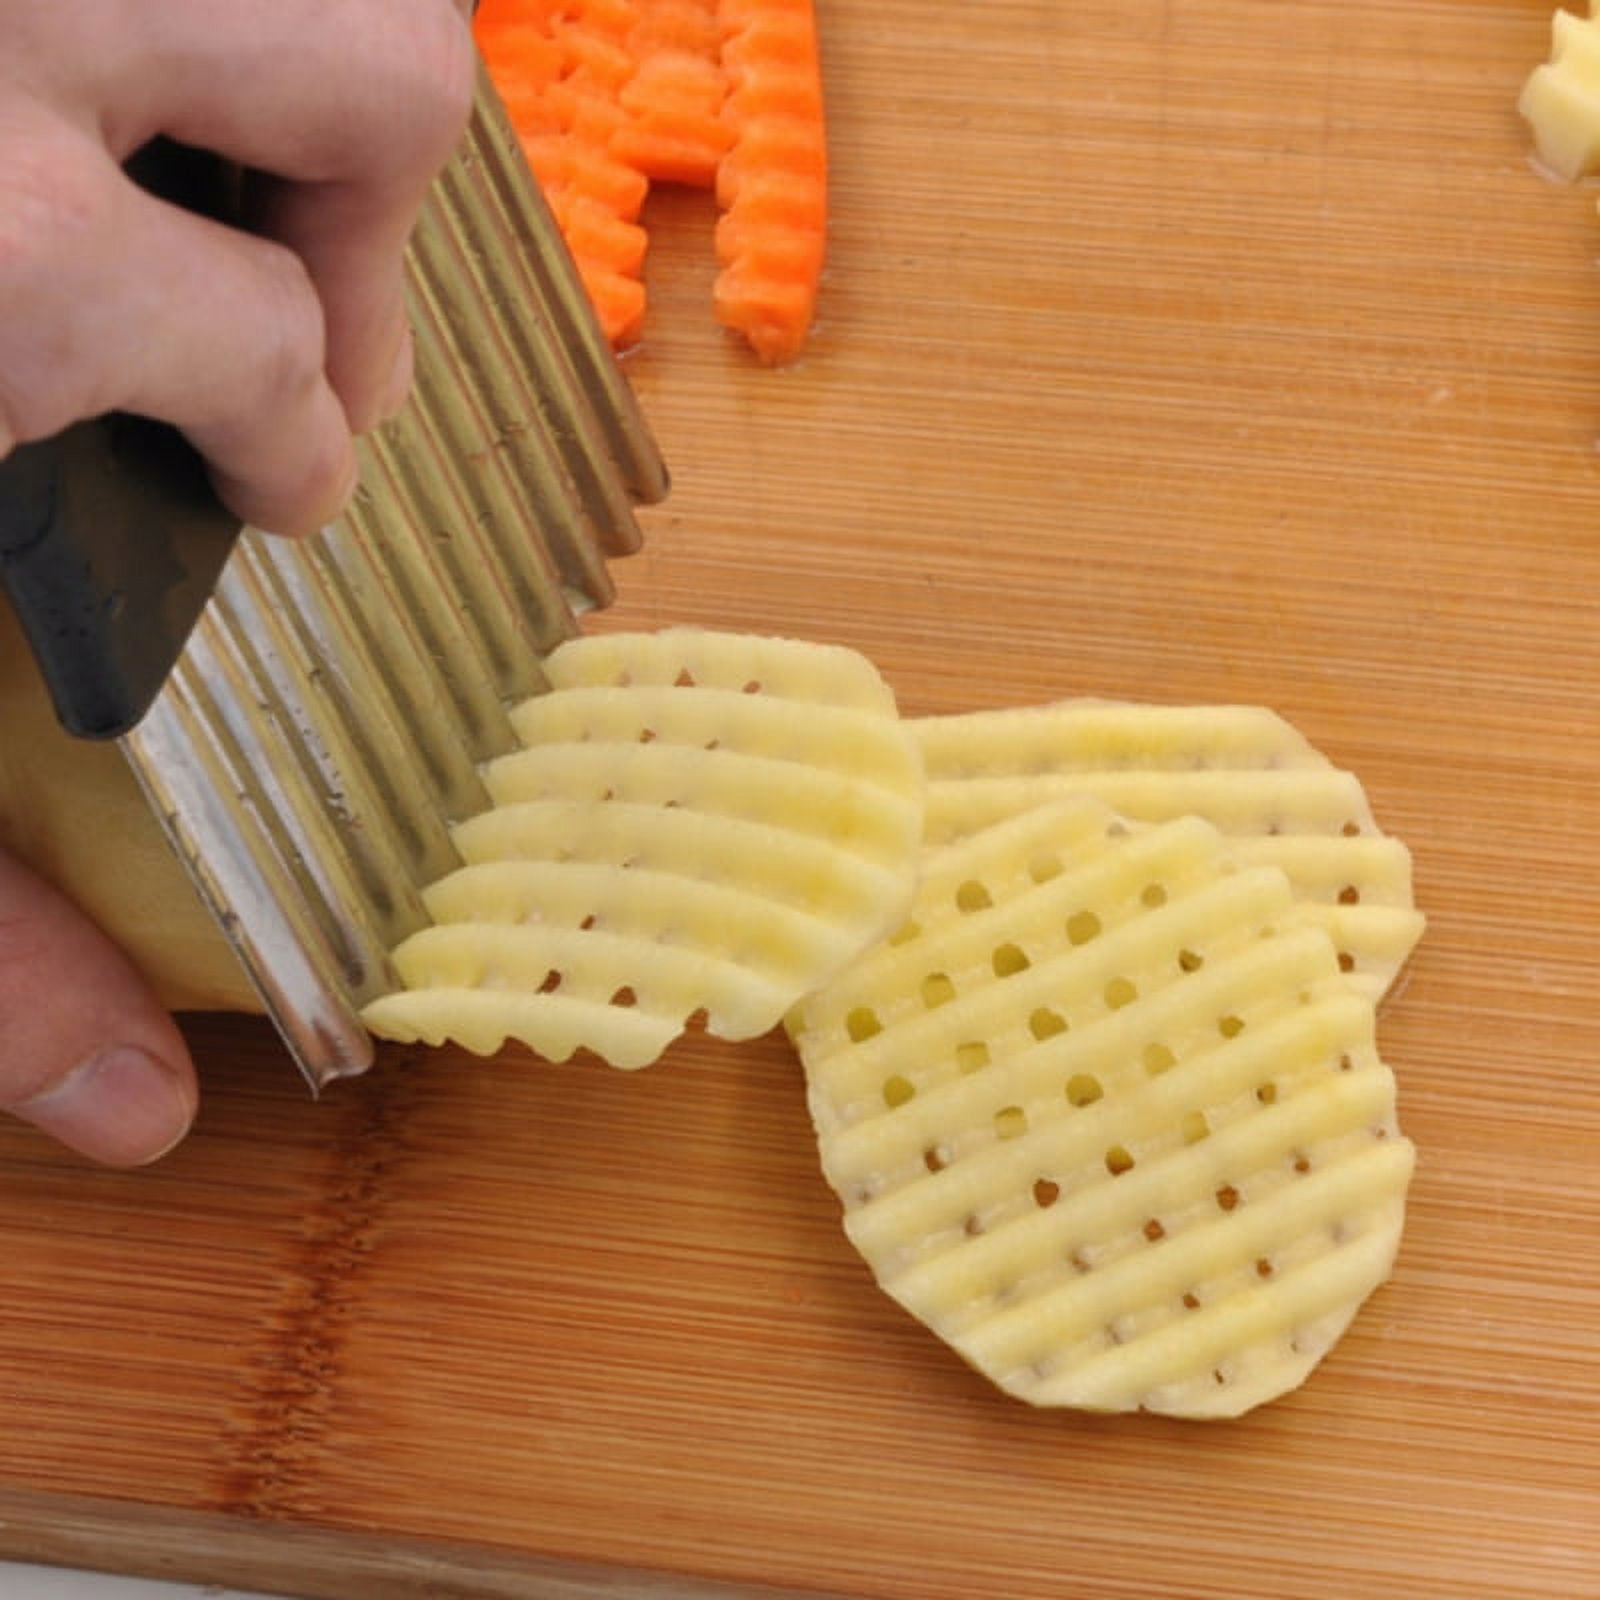 Customized Wavy French Fries Cutter 